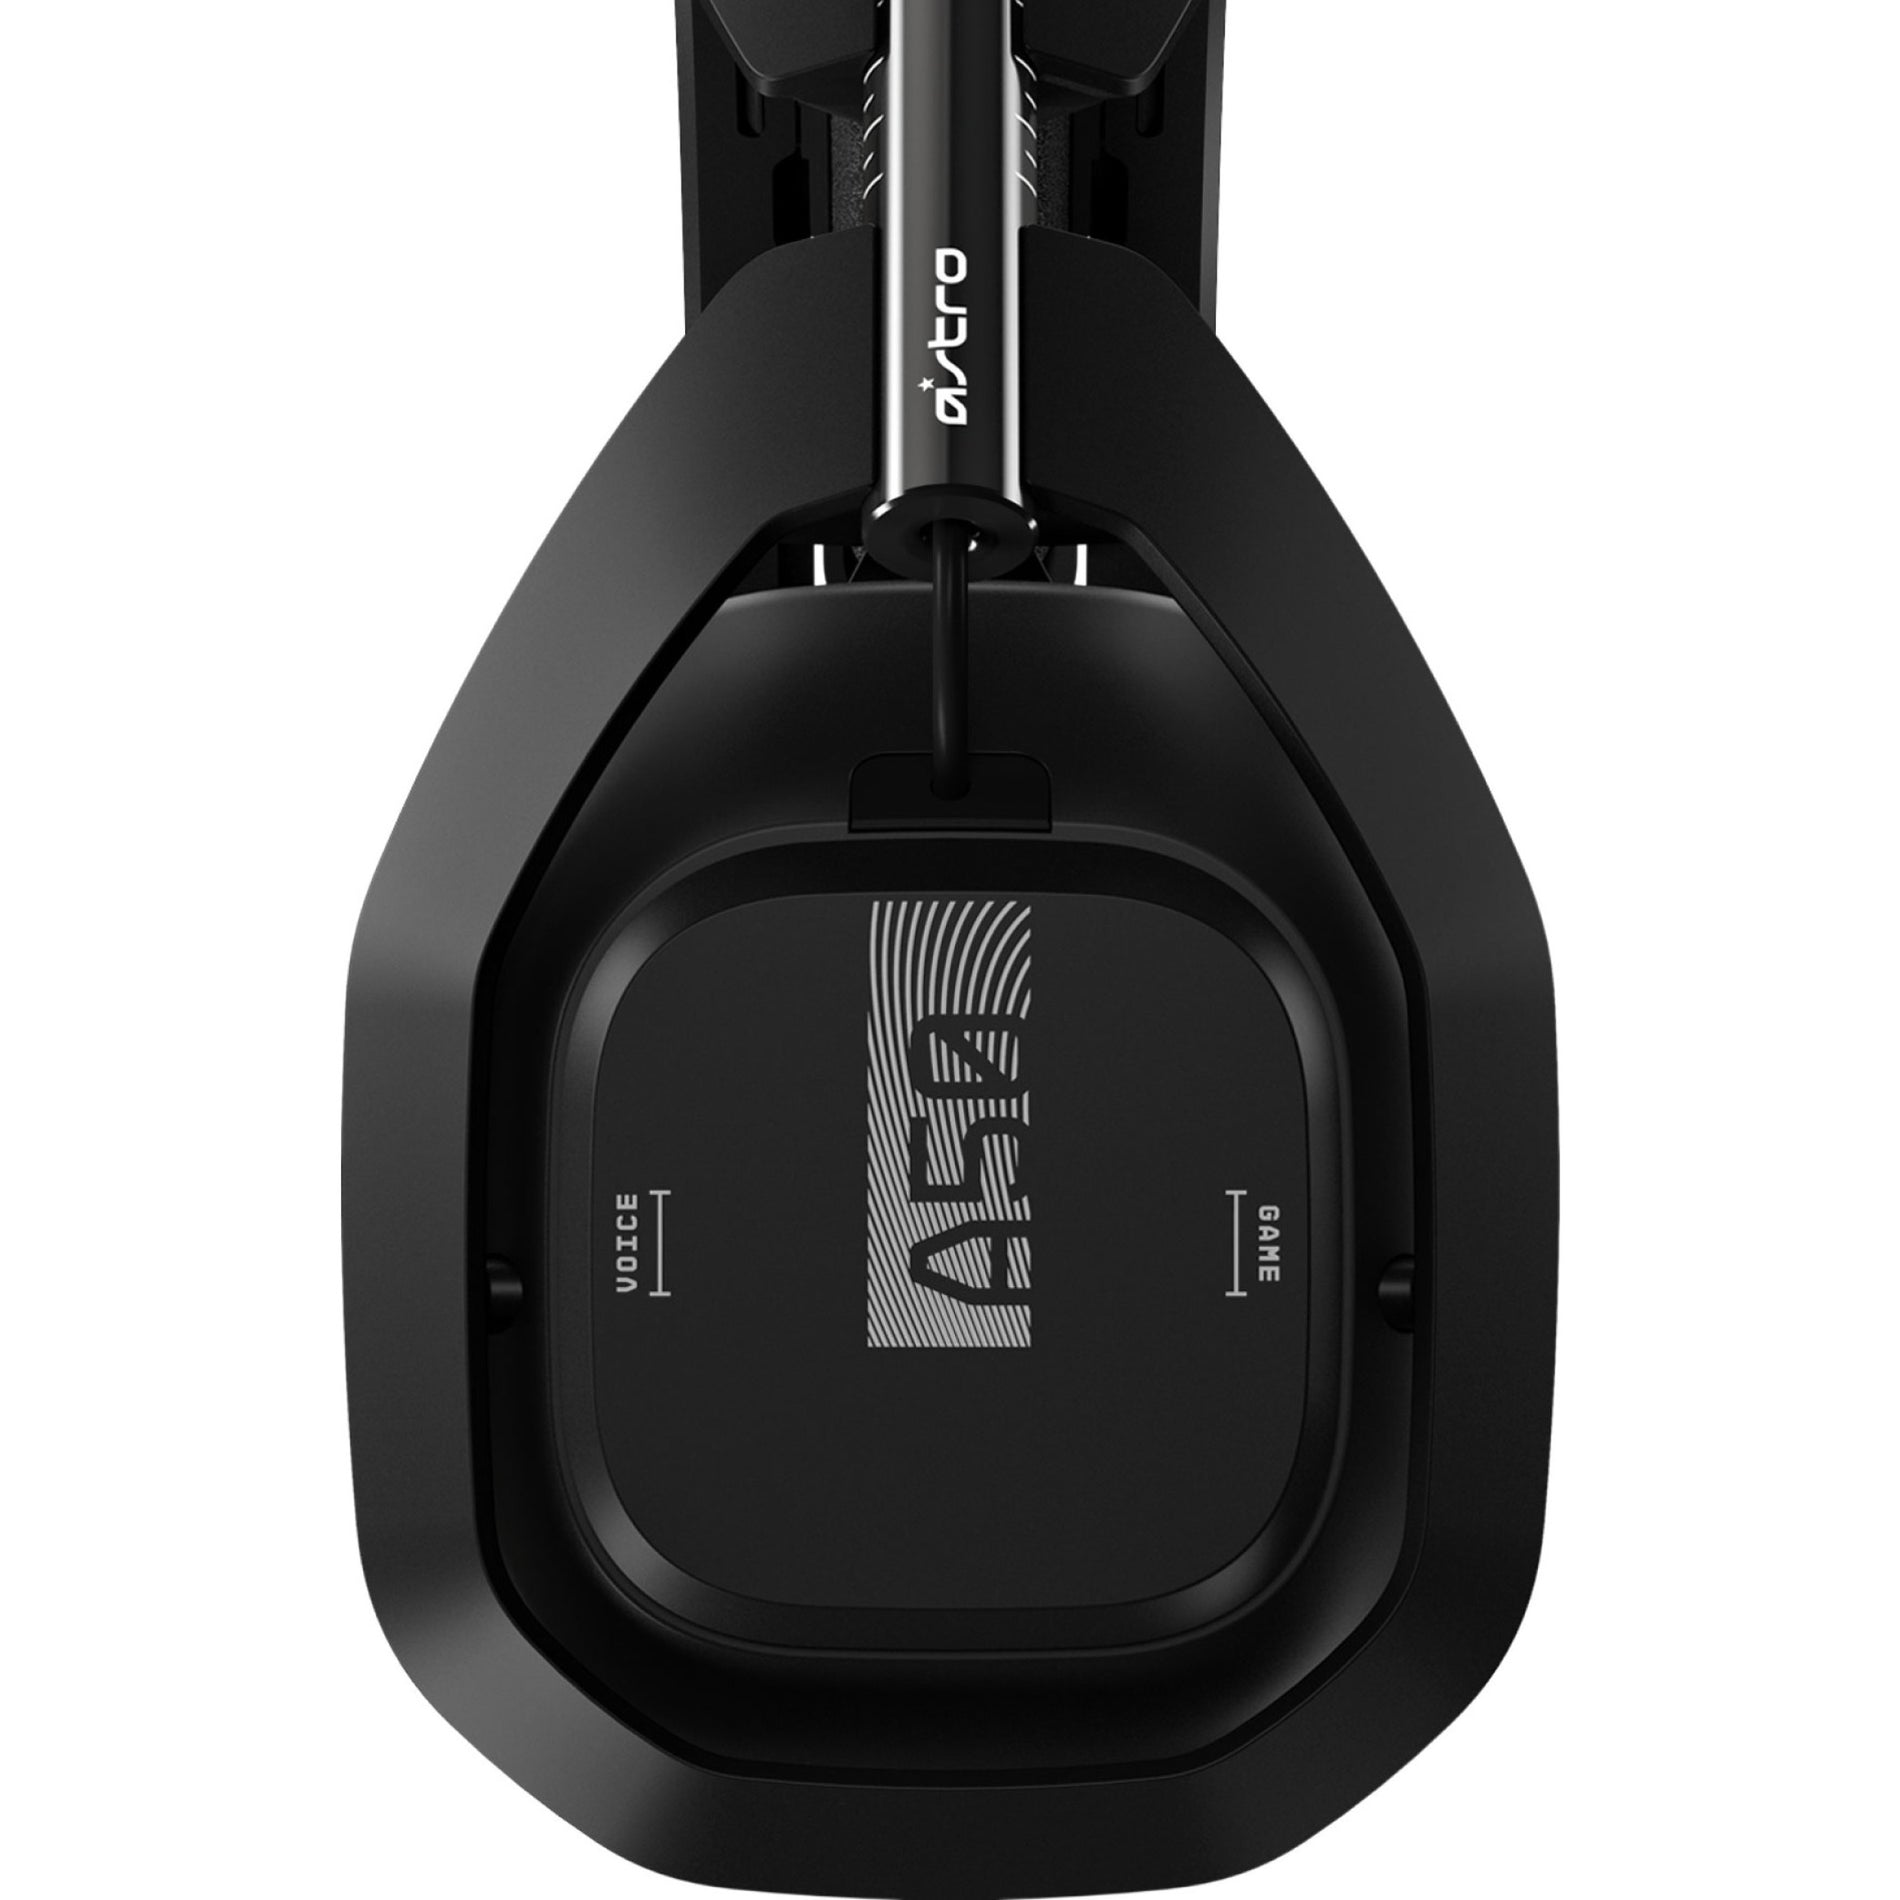 Astro A50 Wireless Headset with Lithium-Ion Battery (939-001673)